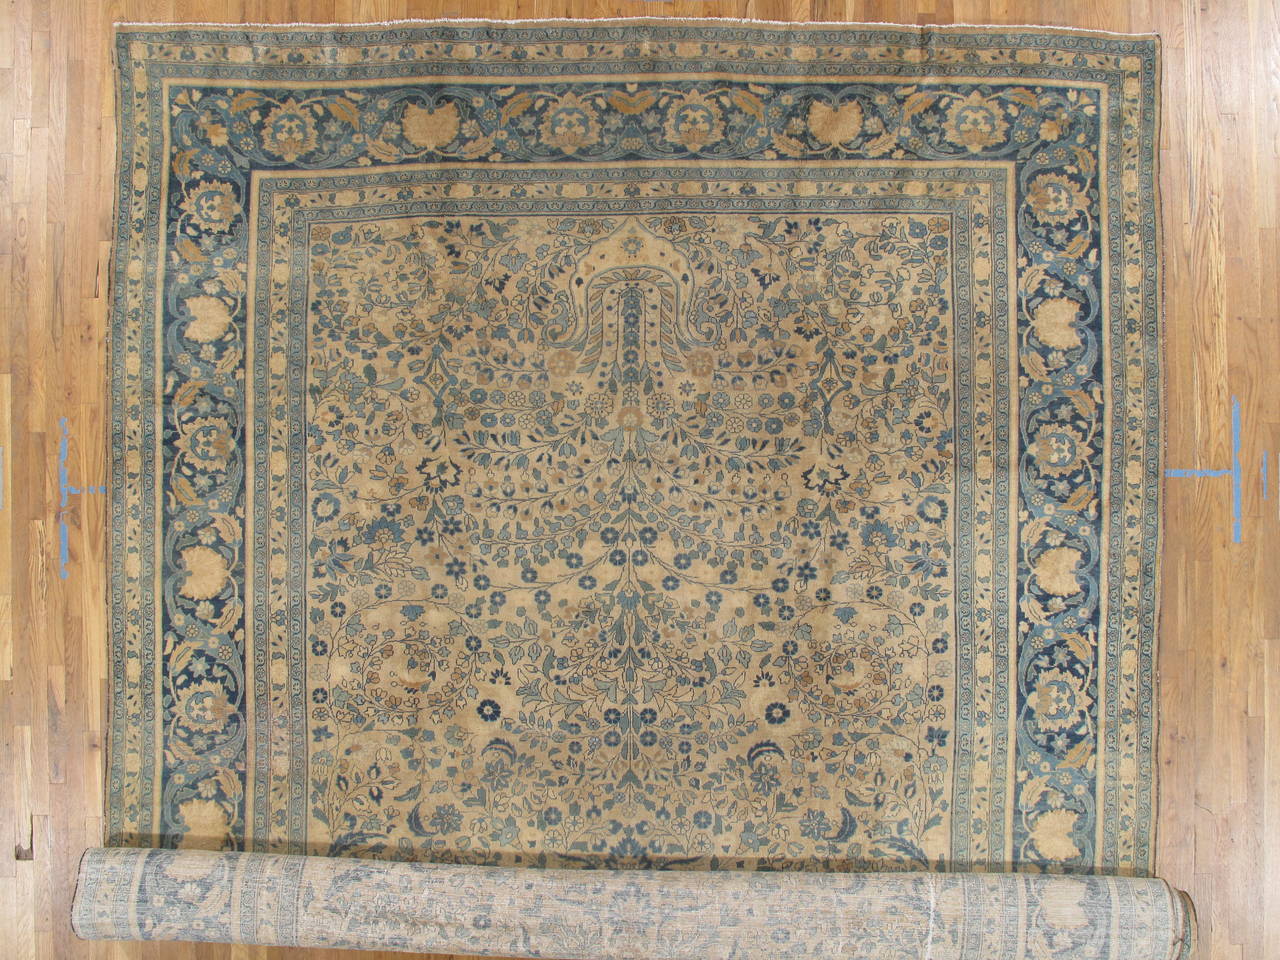 Antique Mashad Persian Carpet, Fine weave, Softs Blues, Beige, Soft Taupe For Sale 4